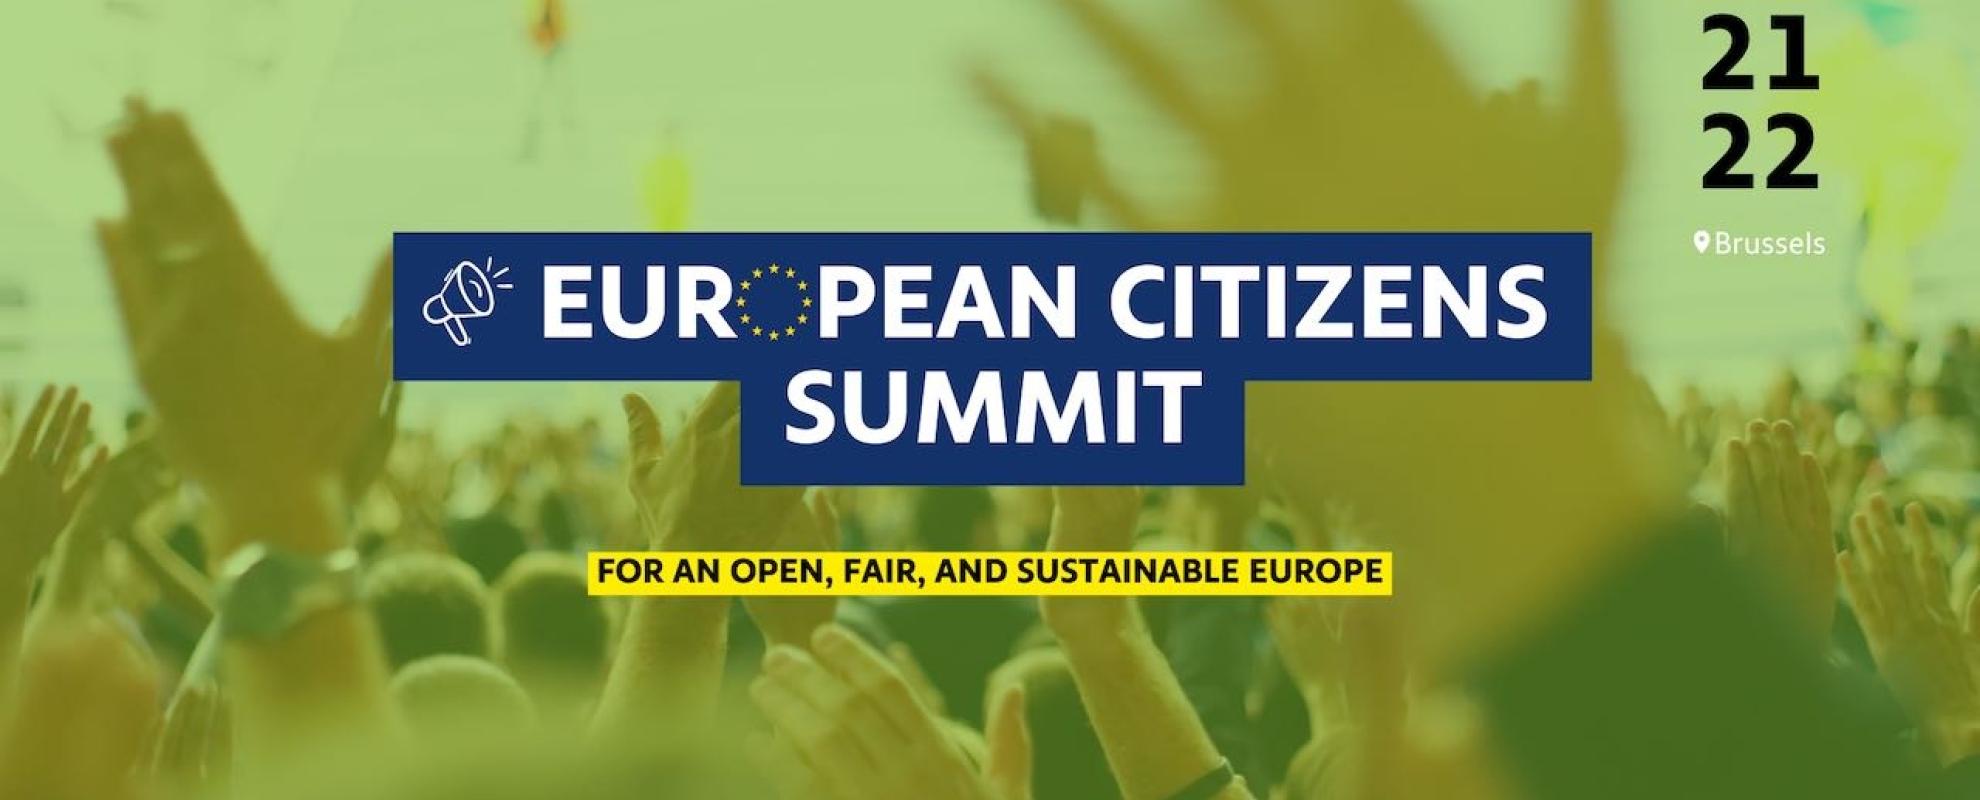 European Citizens Summit for an open, fair and sustainable Europe (banner)